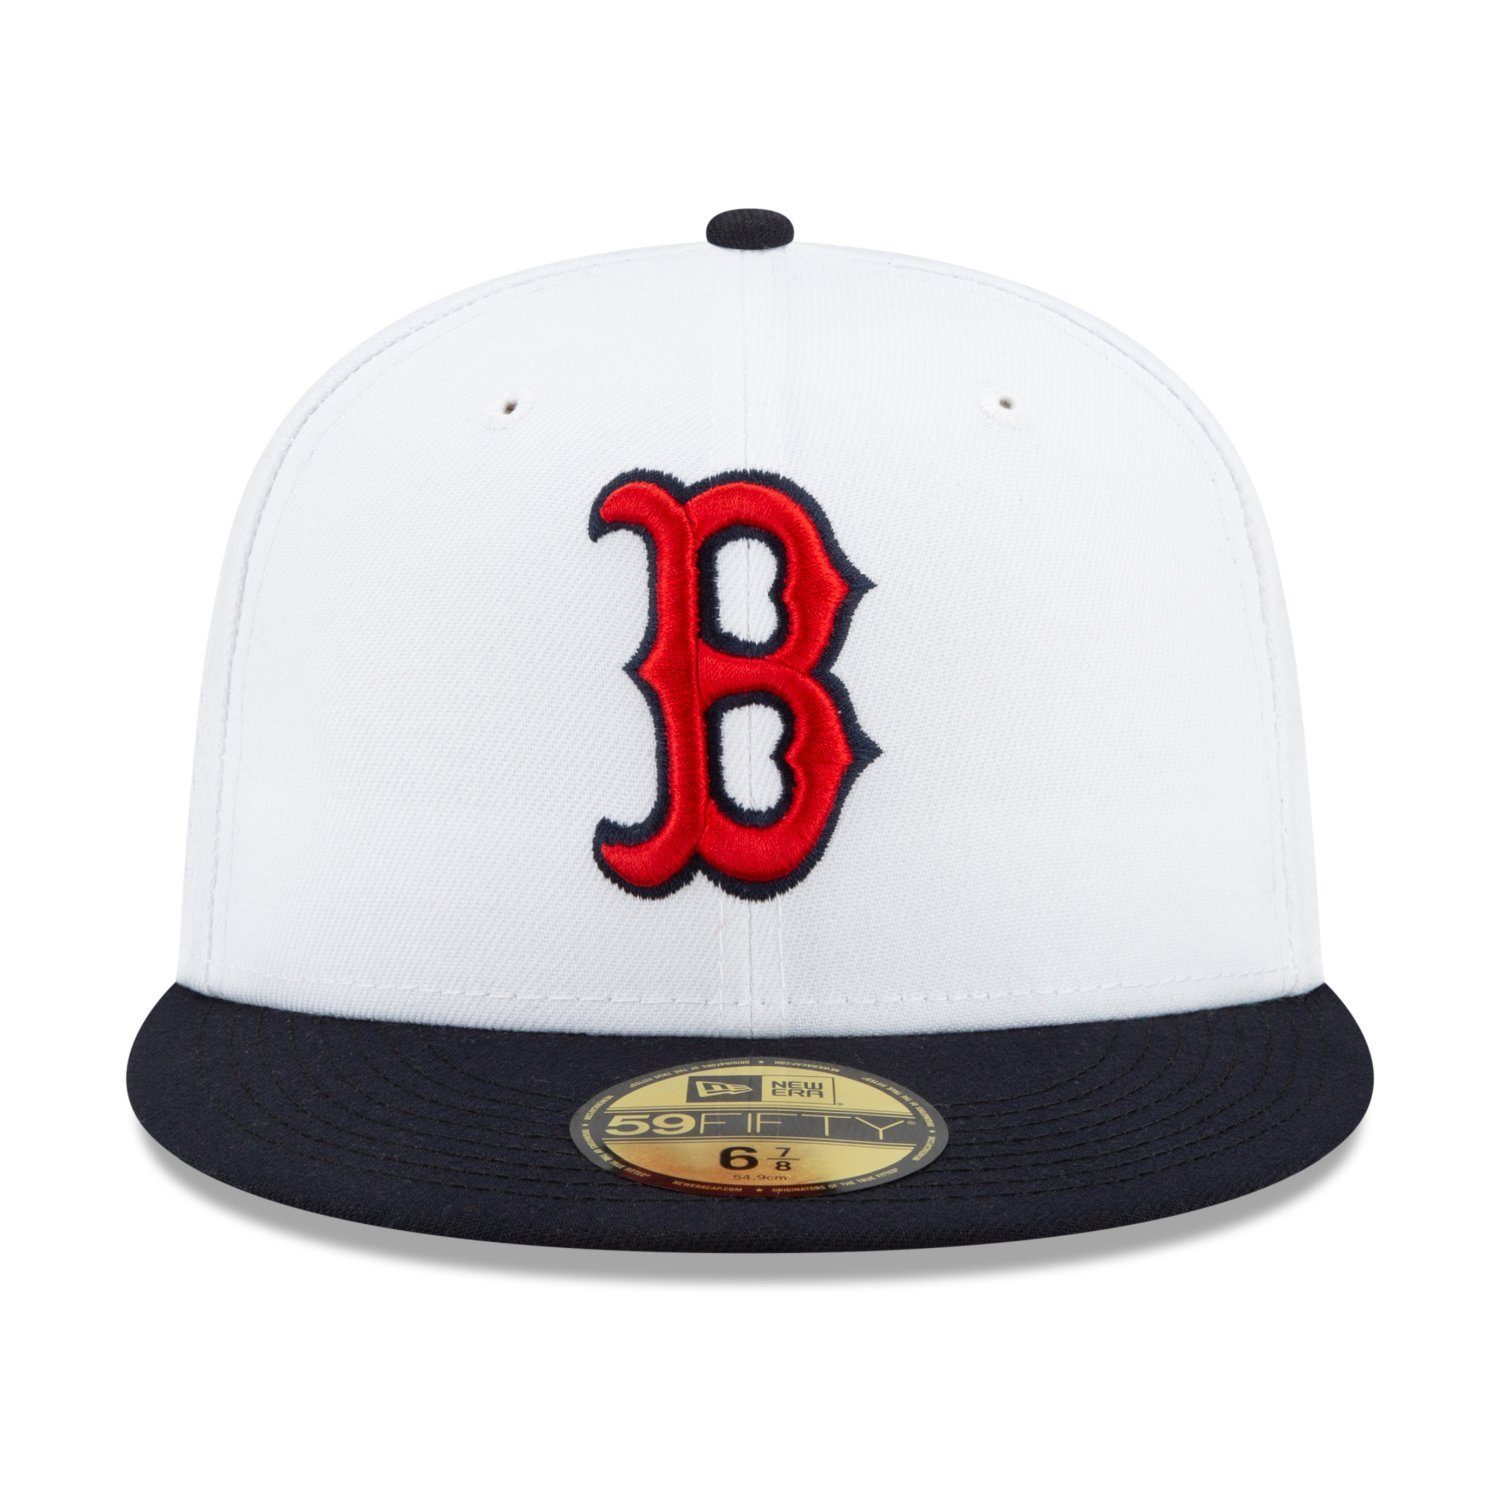 Cap New Fitted Sox SERIES 2004 Red 59Fifty Boston Era WORLD